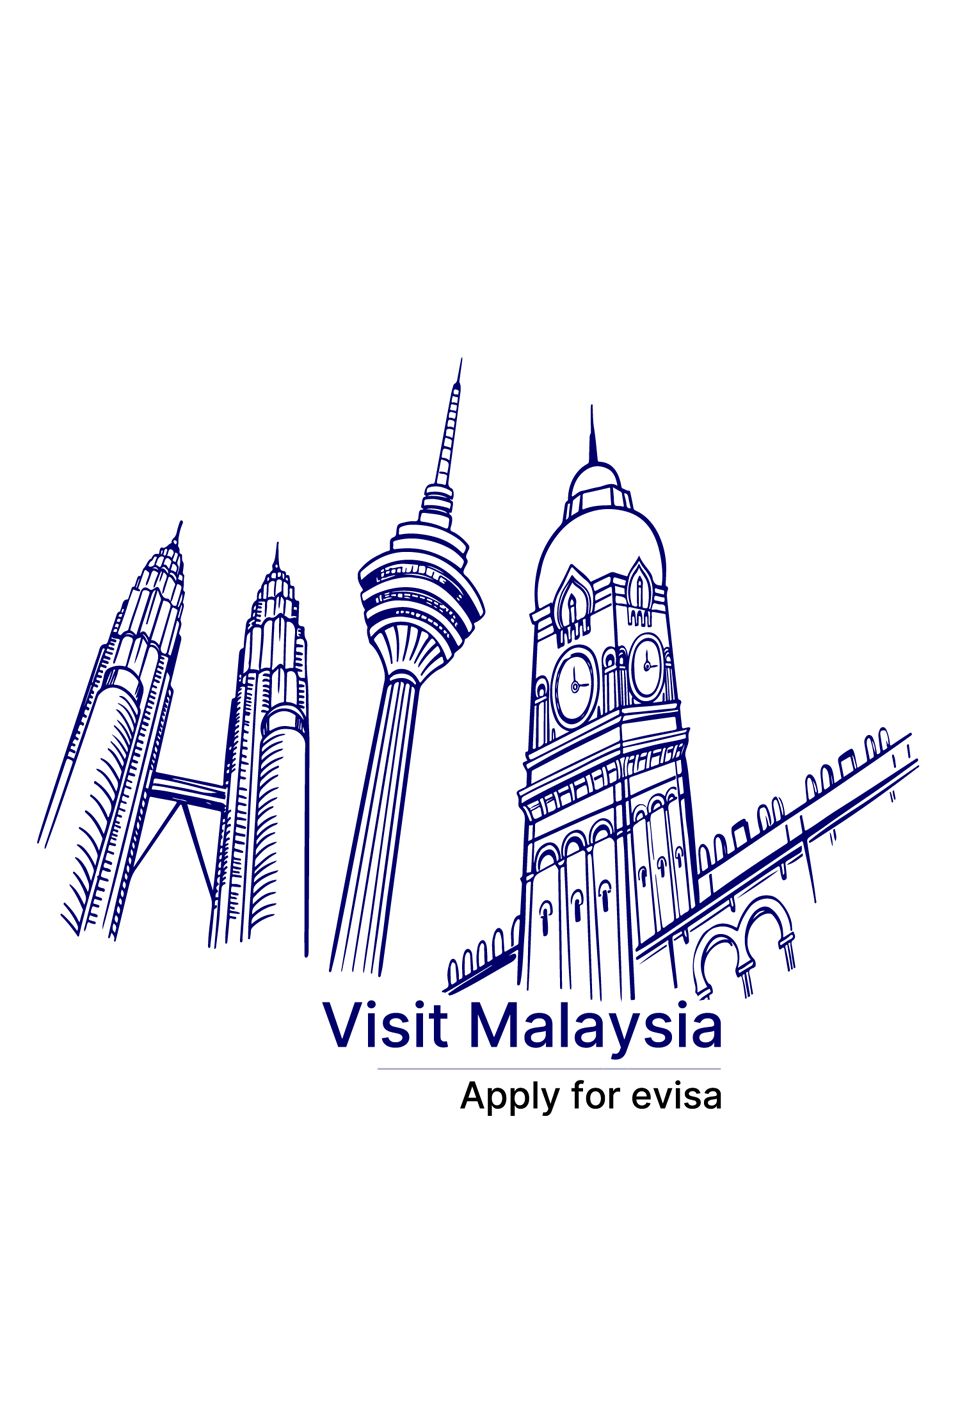 How to apply for Malaysia eVisa